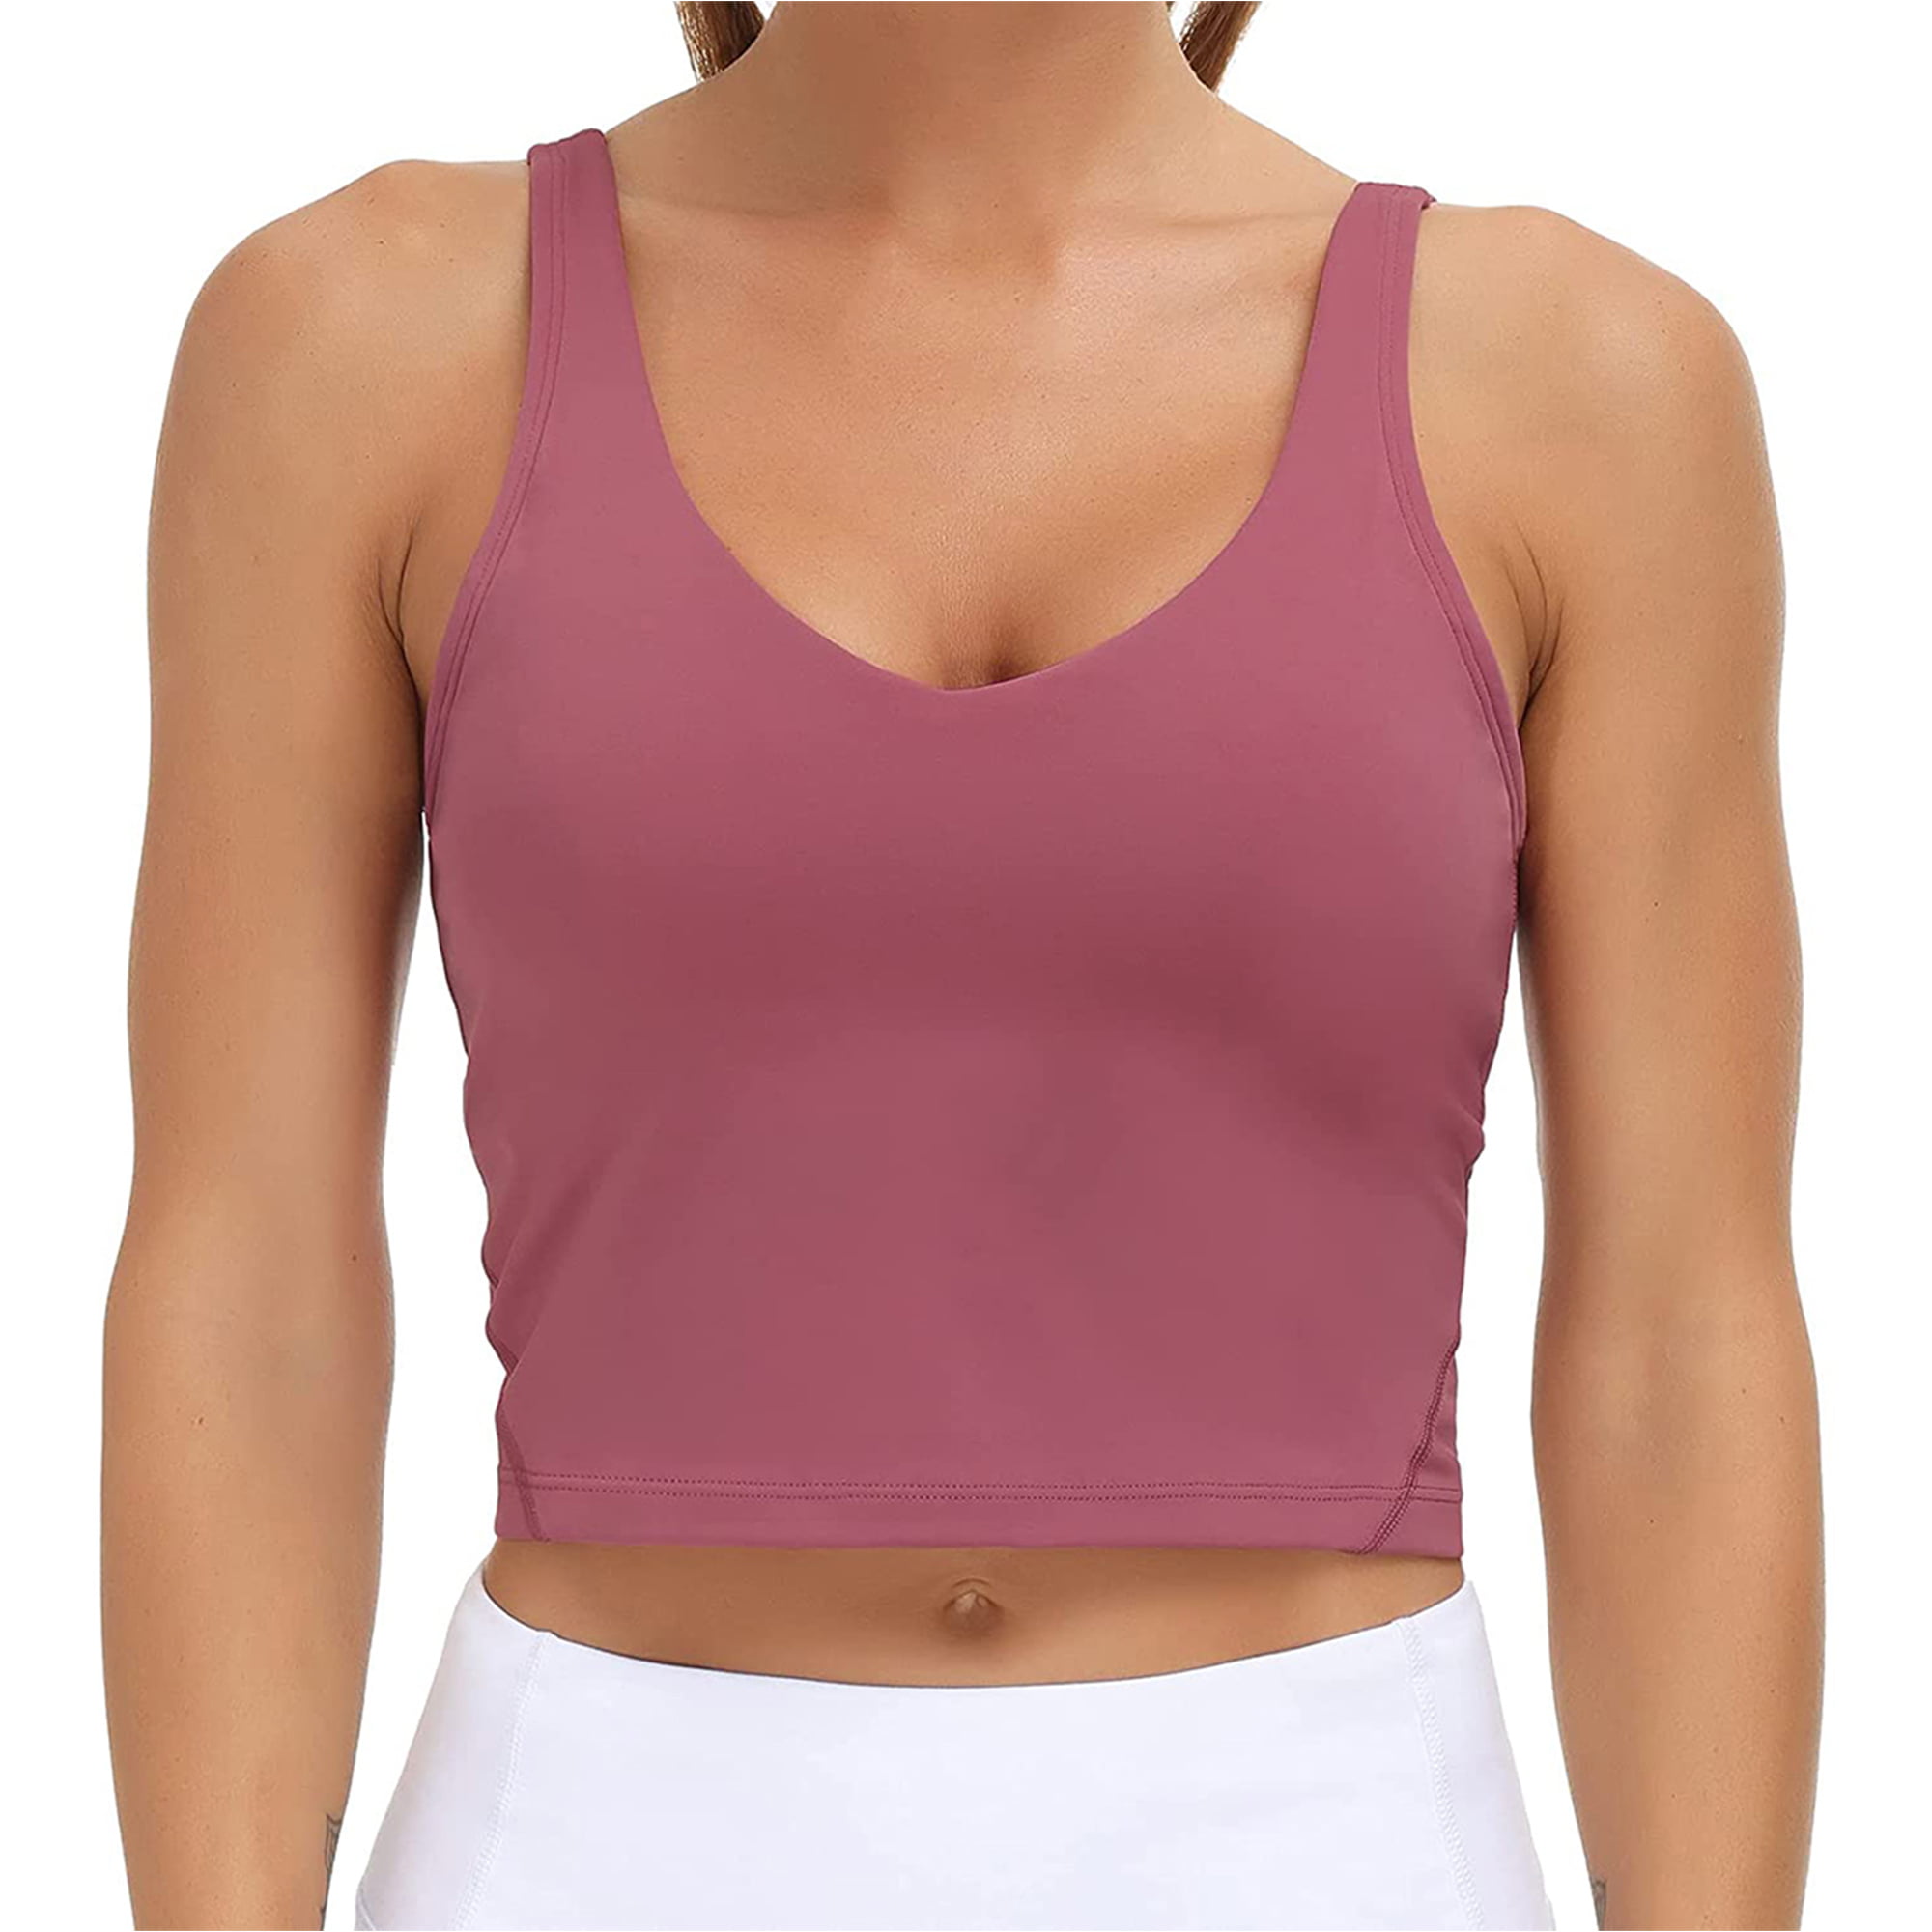 THE GYM PEOPLE Womens' Sports Bra Longline Wirefree Padded with Medium  Support